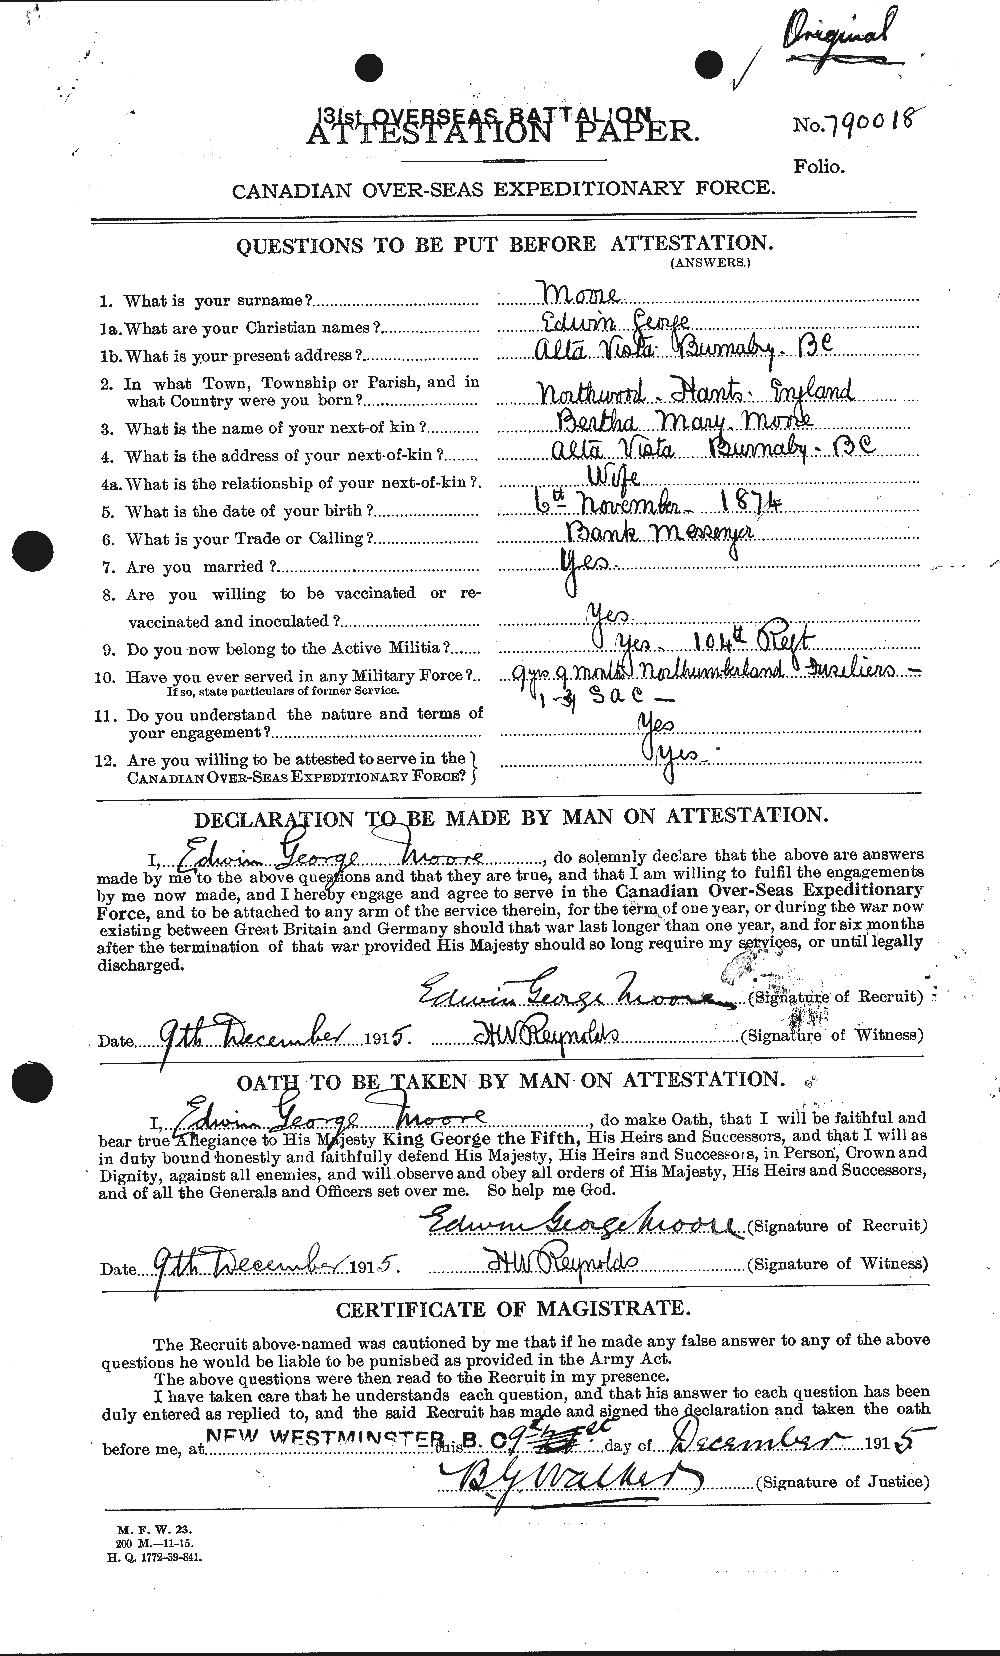 Personnel Records of the First World War - CEF 506642a